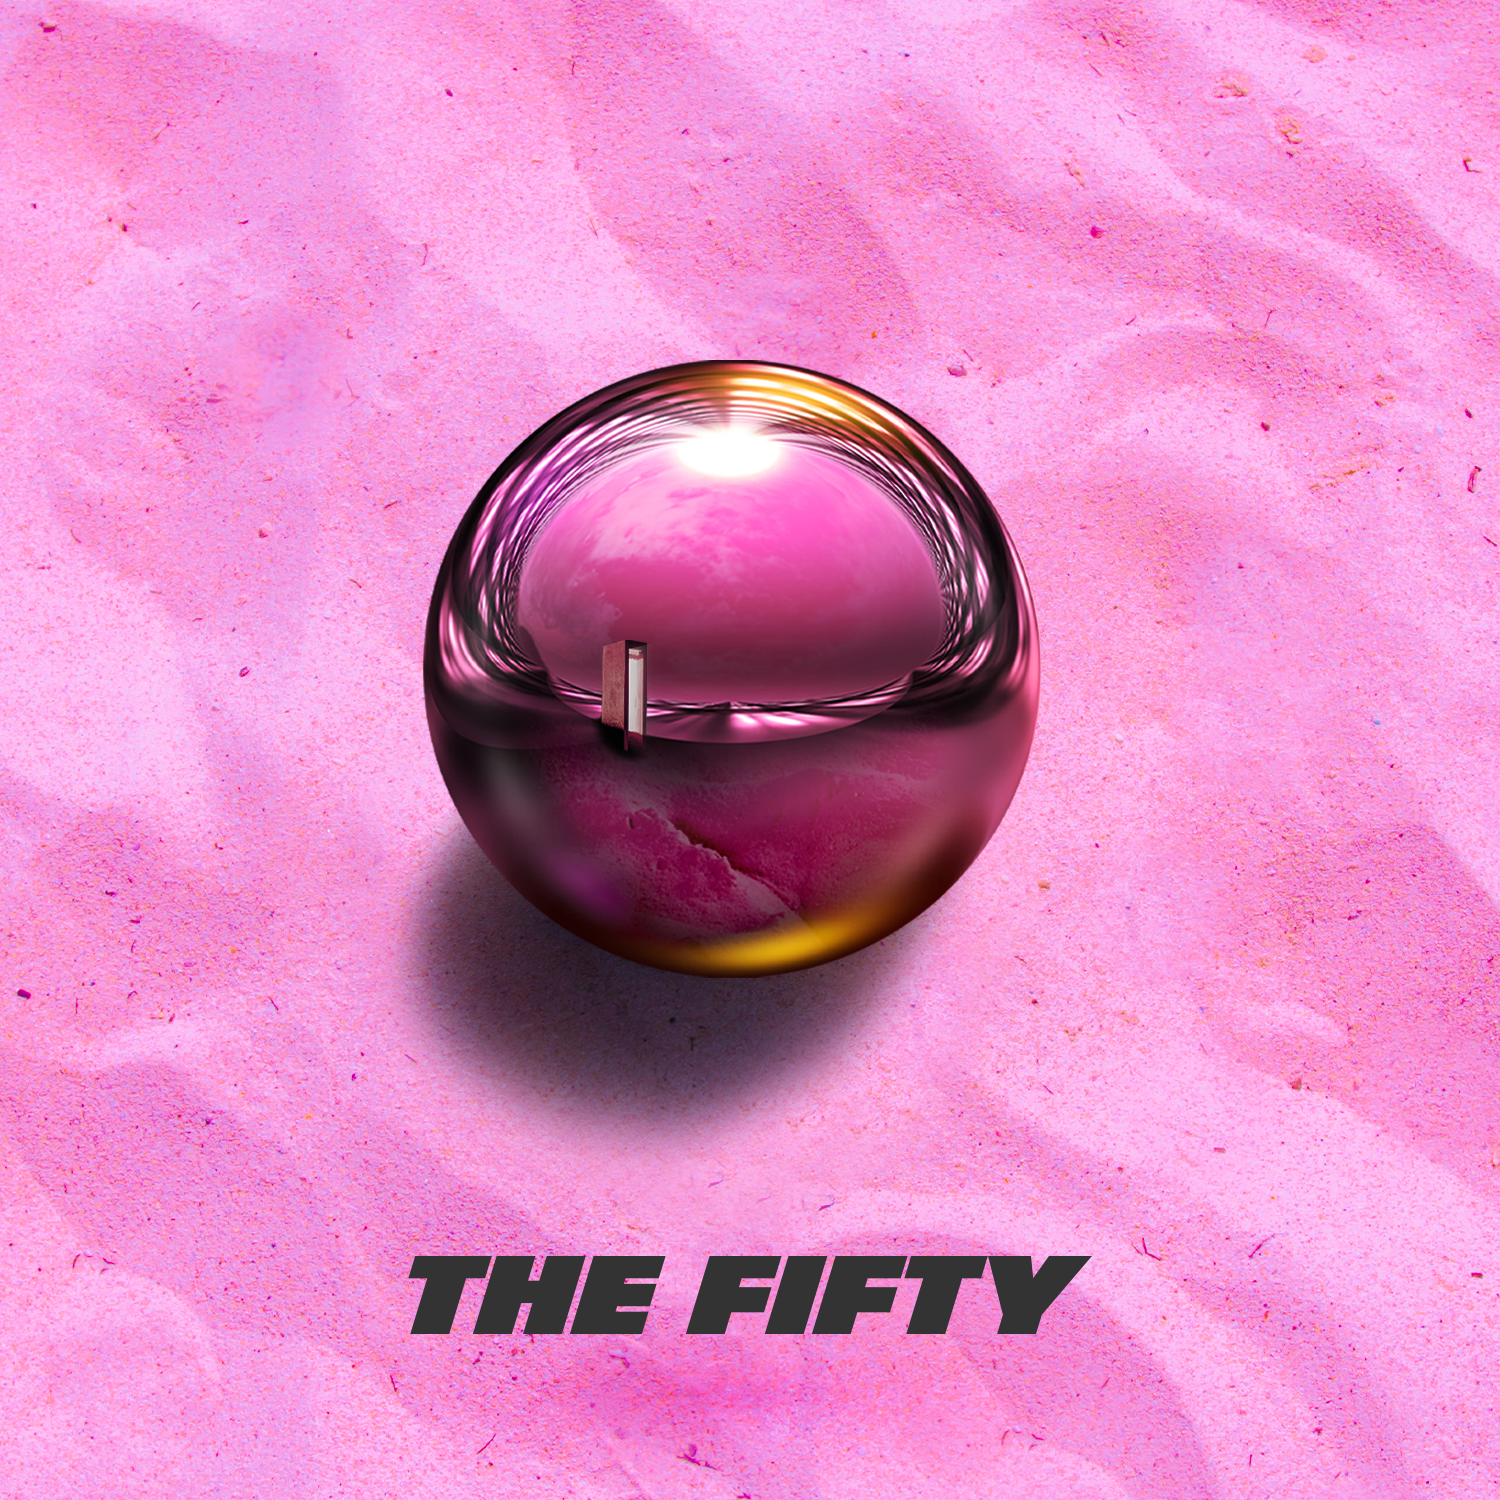 FIFTY FIFTY 1st EP Album 'The Fifty'. PLAY KPOP CAFE